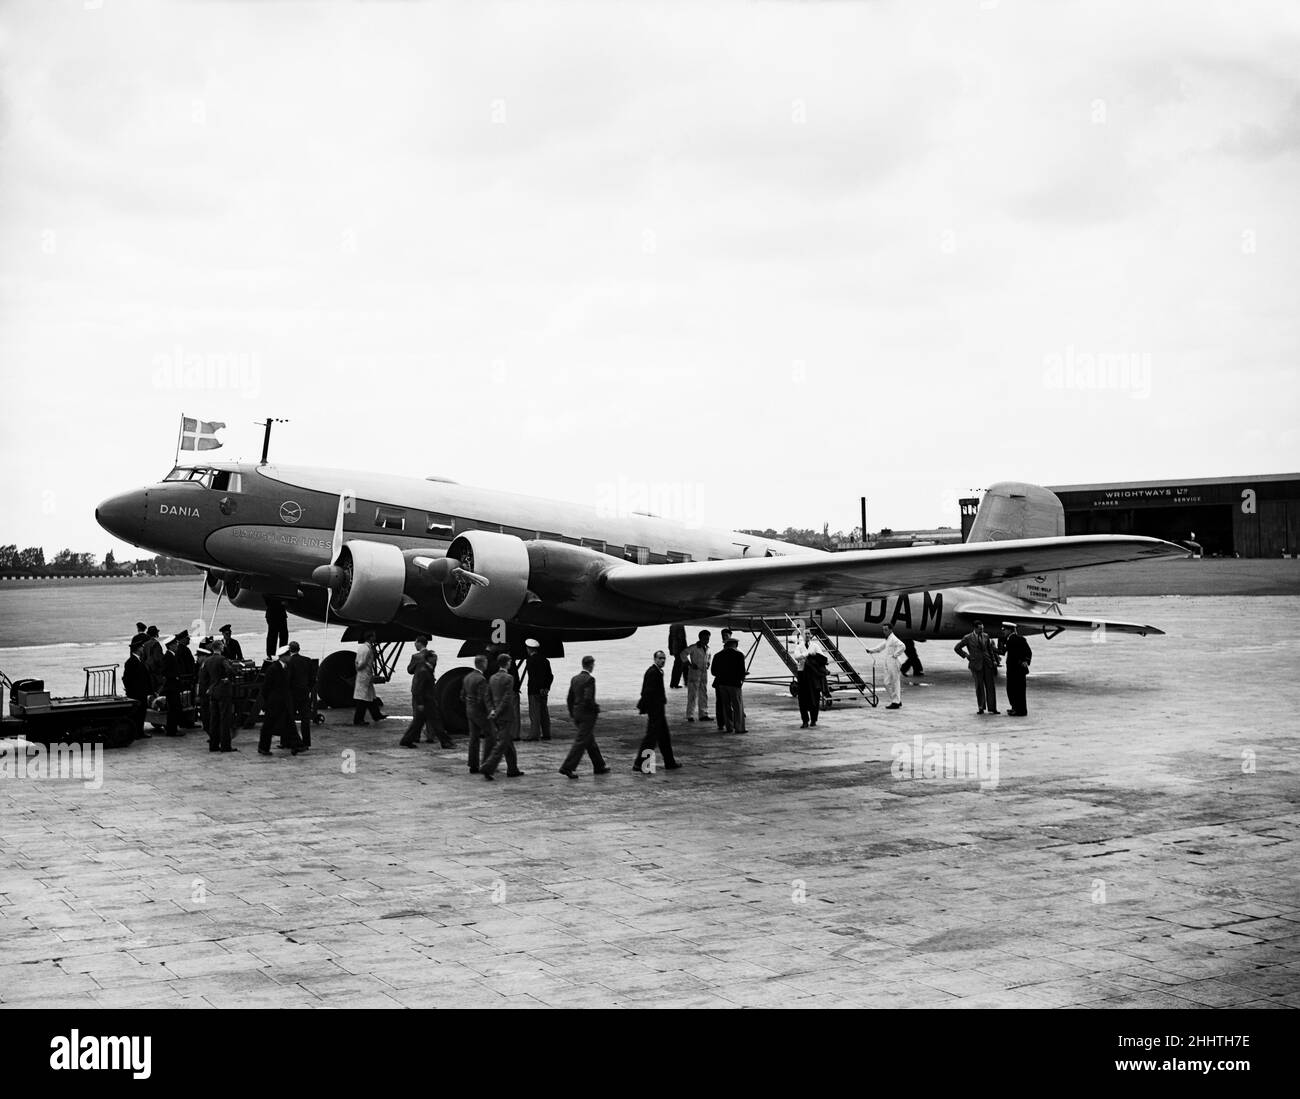 Danish Air Lines' Focke-Wulf Fw 200A-0 Condor OY-DAM Dania seen here at Croydon on 28th July 1938, after completing the inaugural flight between Copenhagen to London. The flight carried Prince Axel of Denmark to London for an official visit. Stock Photo